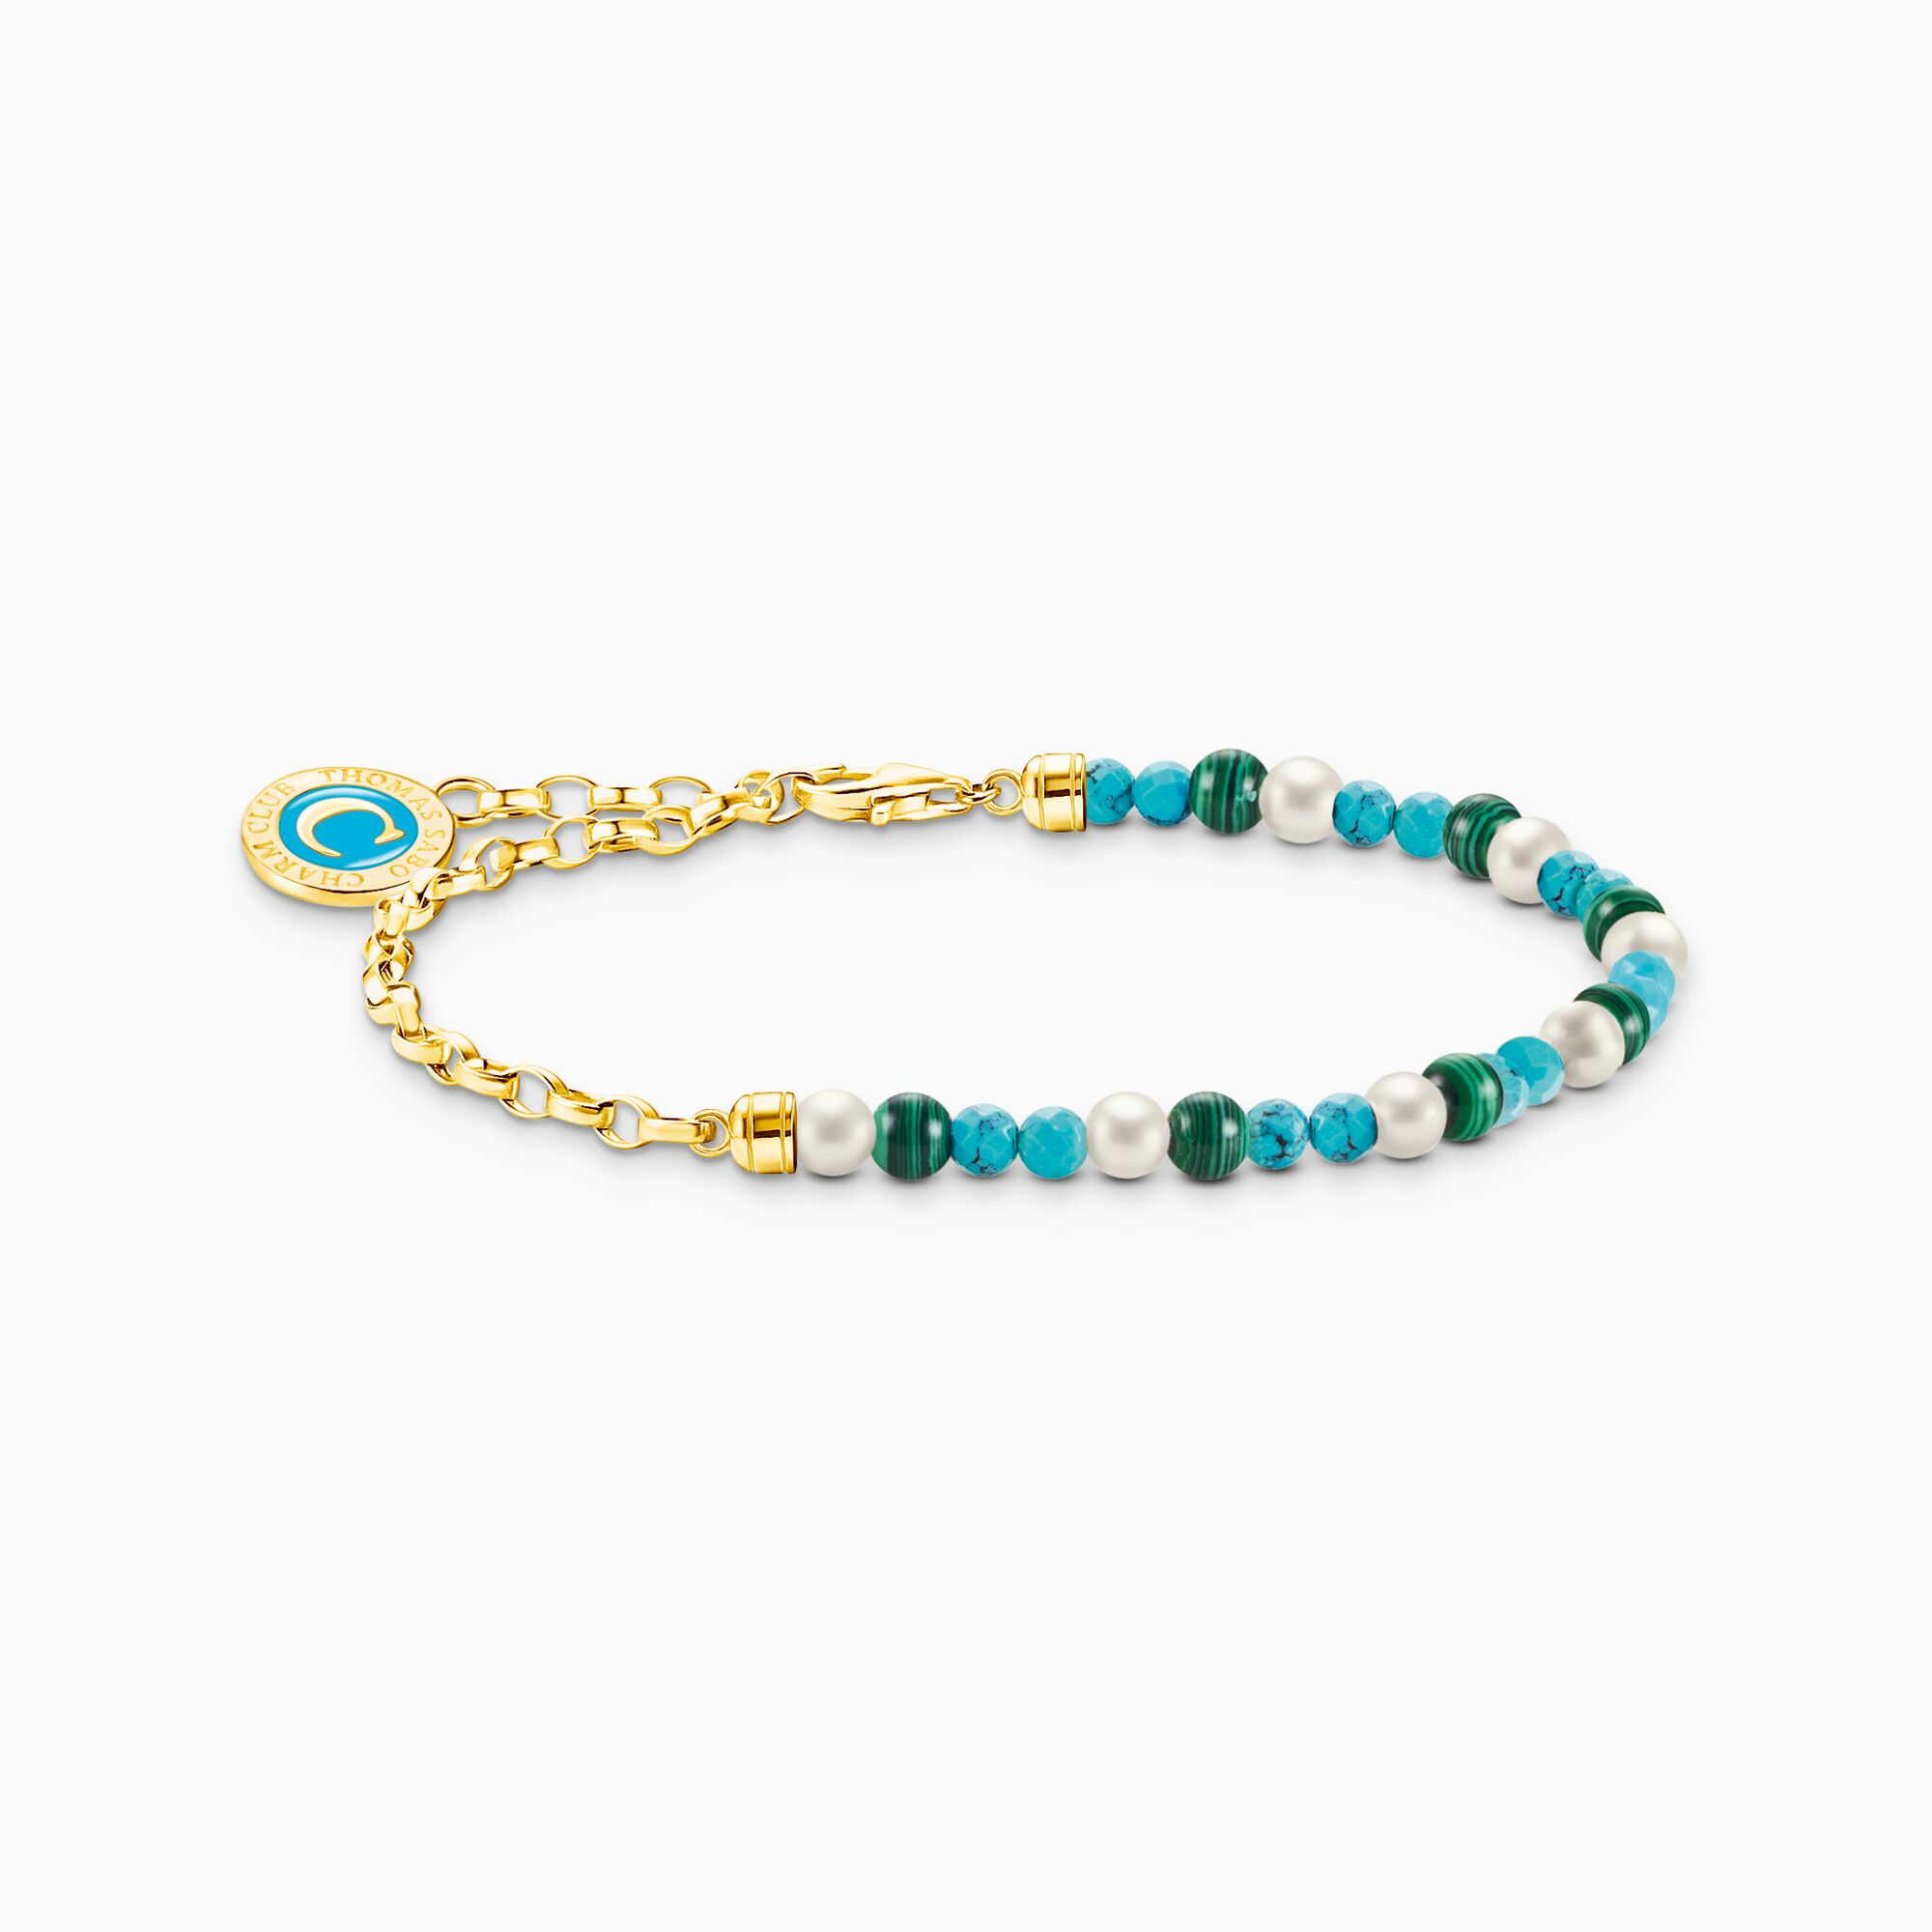 Member Charm bracelet with white pearls, malachite and Charmista disc gold plated from the Charm Club collection in the THOMAS SABO online store